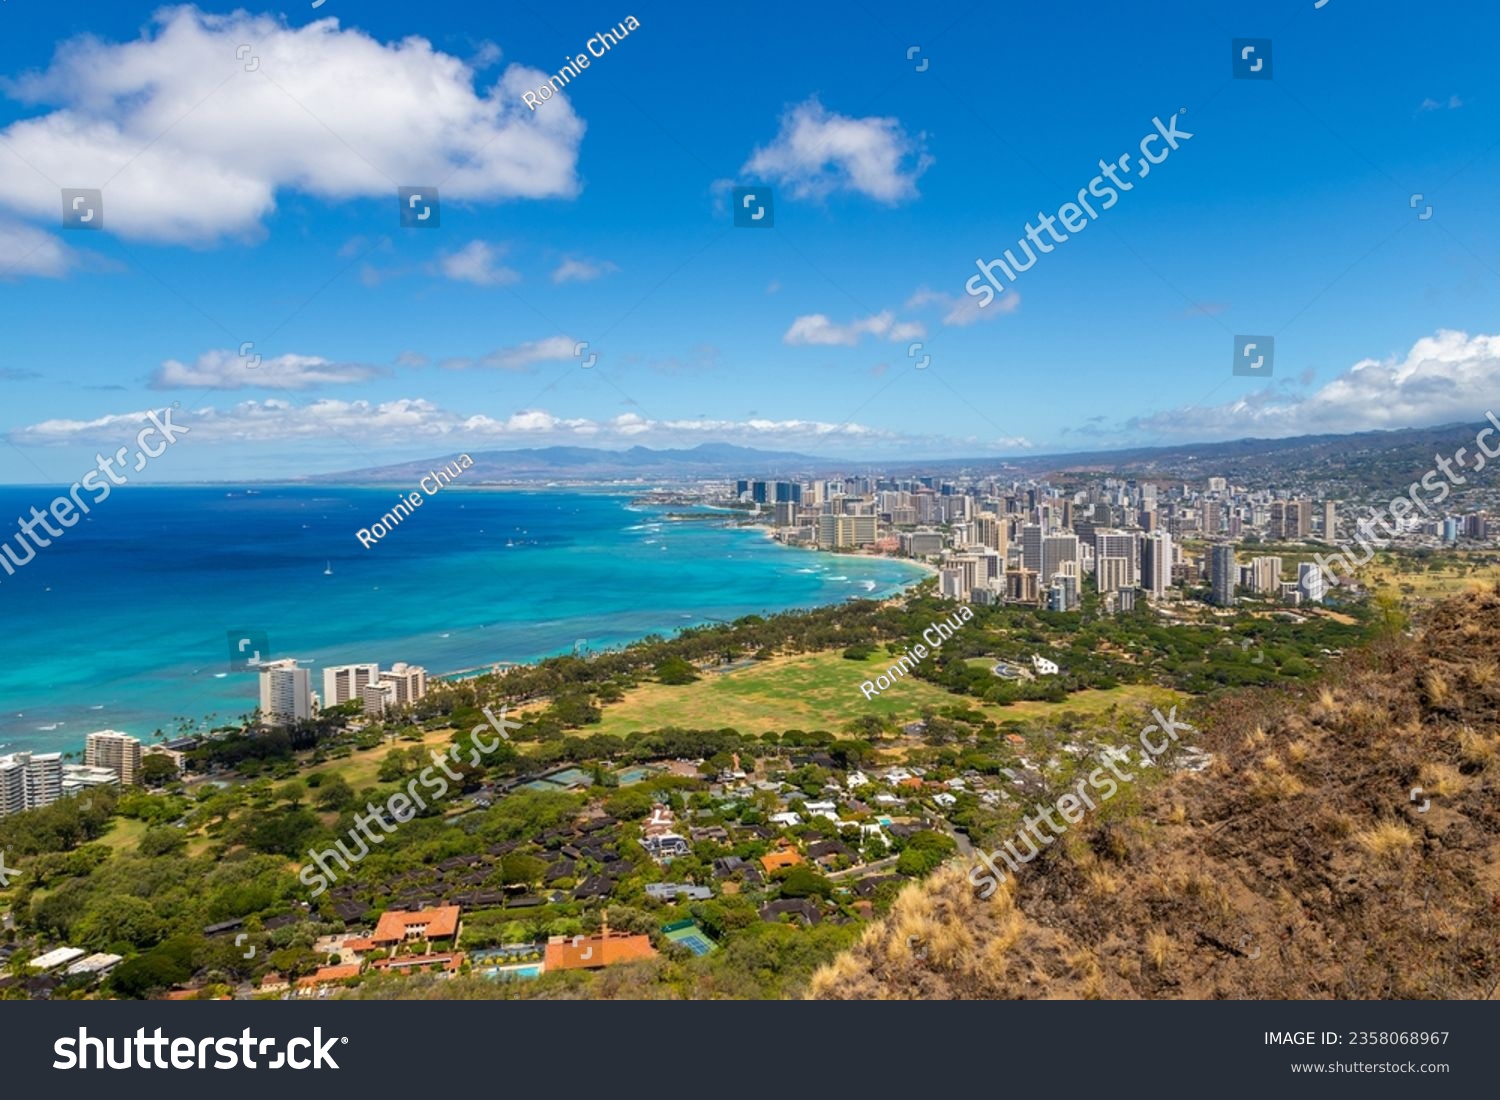 Wide angle view of Honolulu city from Diamond Head lookout, with Waikiki beach landscape and ocean views. #2358068967